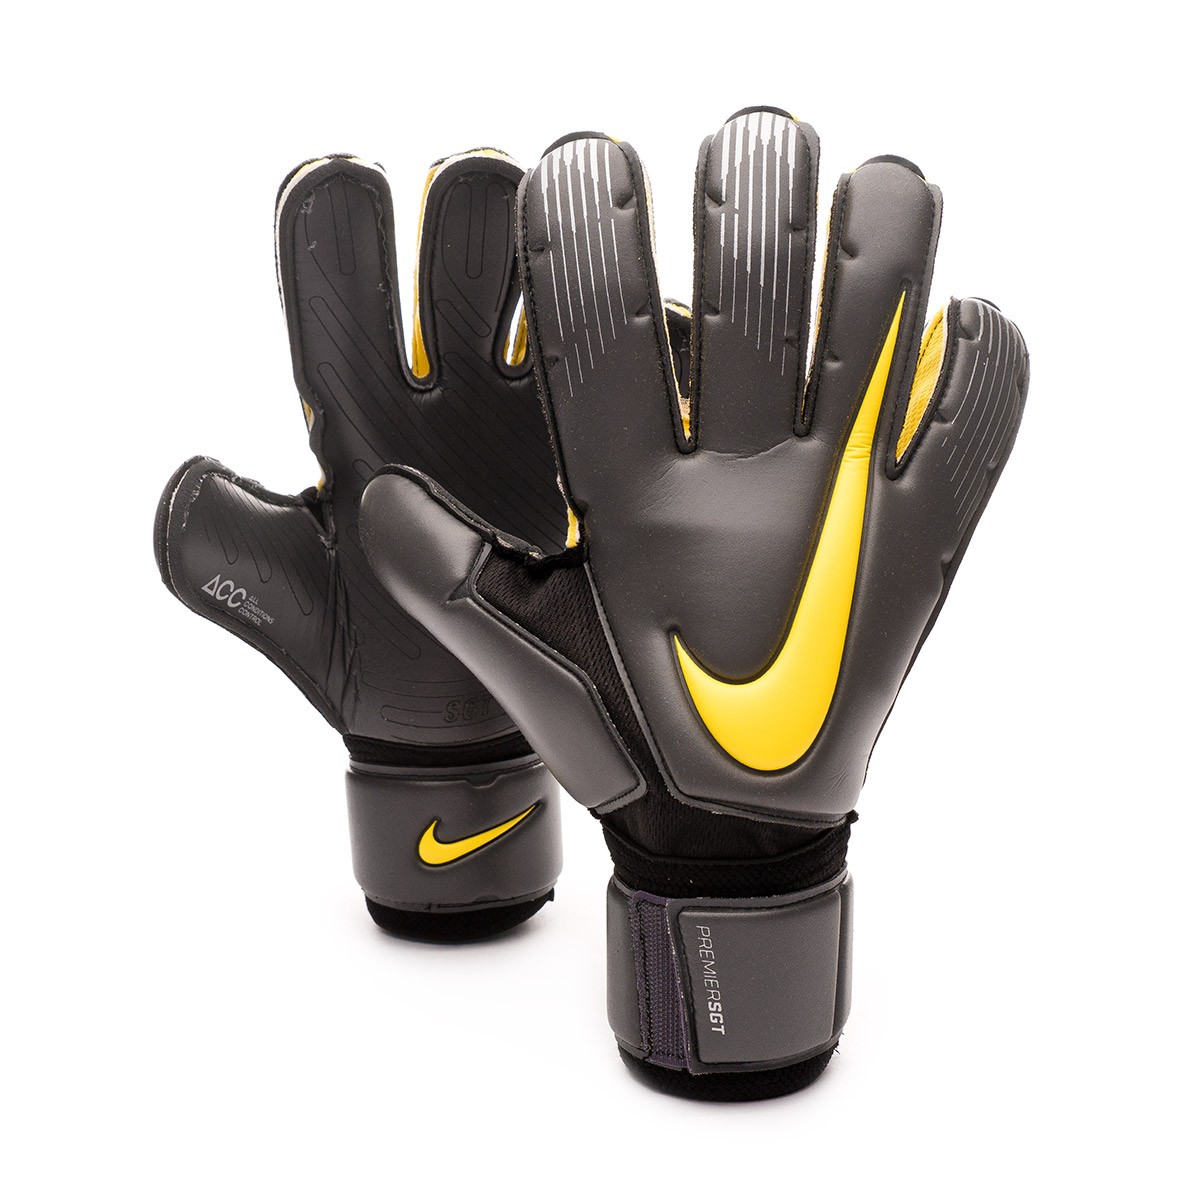 Guantes Nike Sgt Clearance, GET 60% OFF, ros.jobs